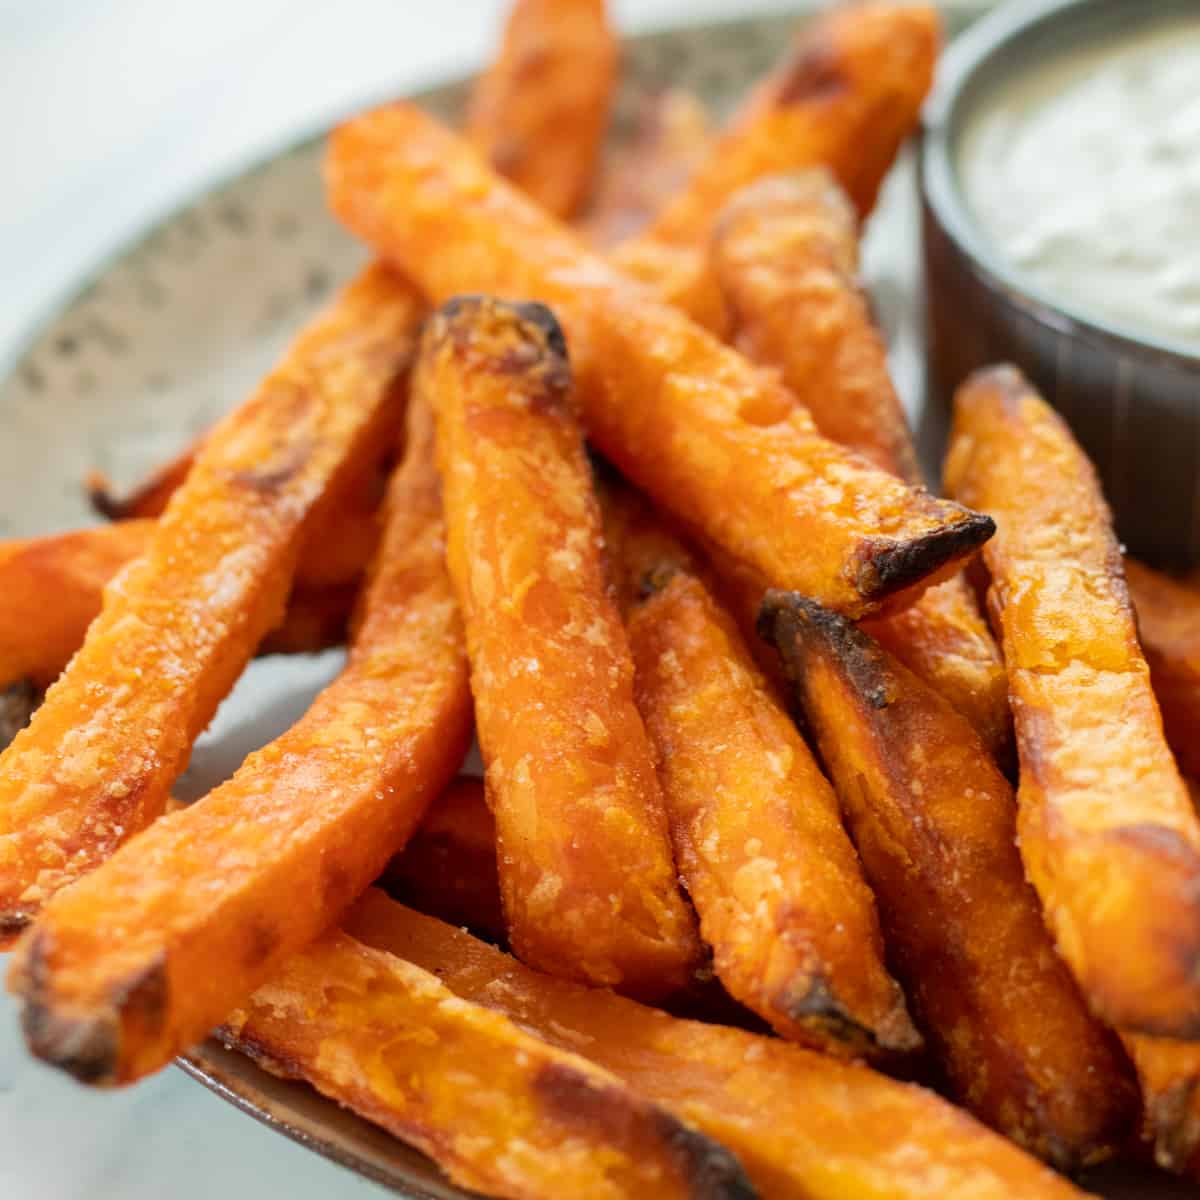 sweet potatoes on a plate next to a dipping sauce